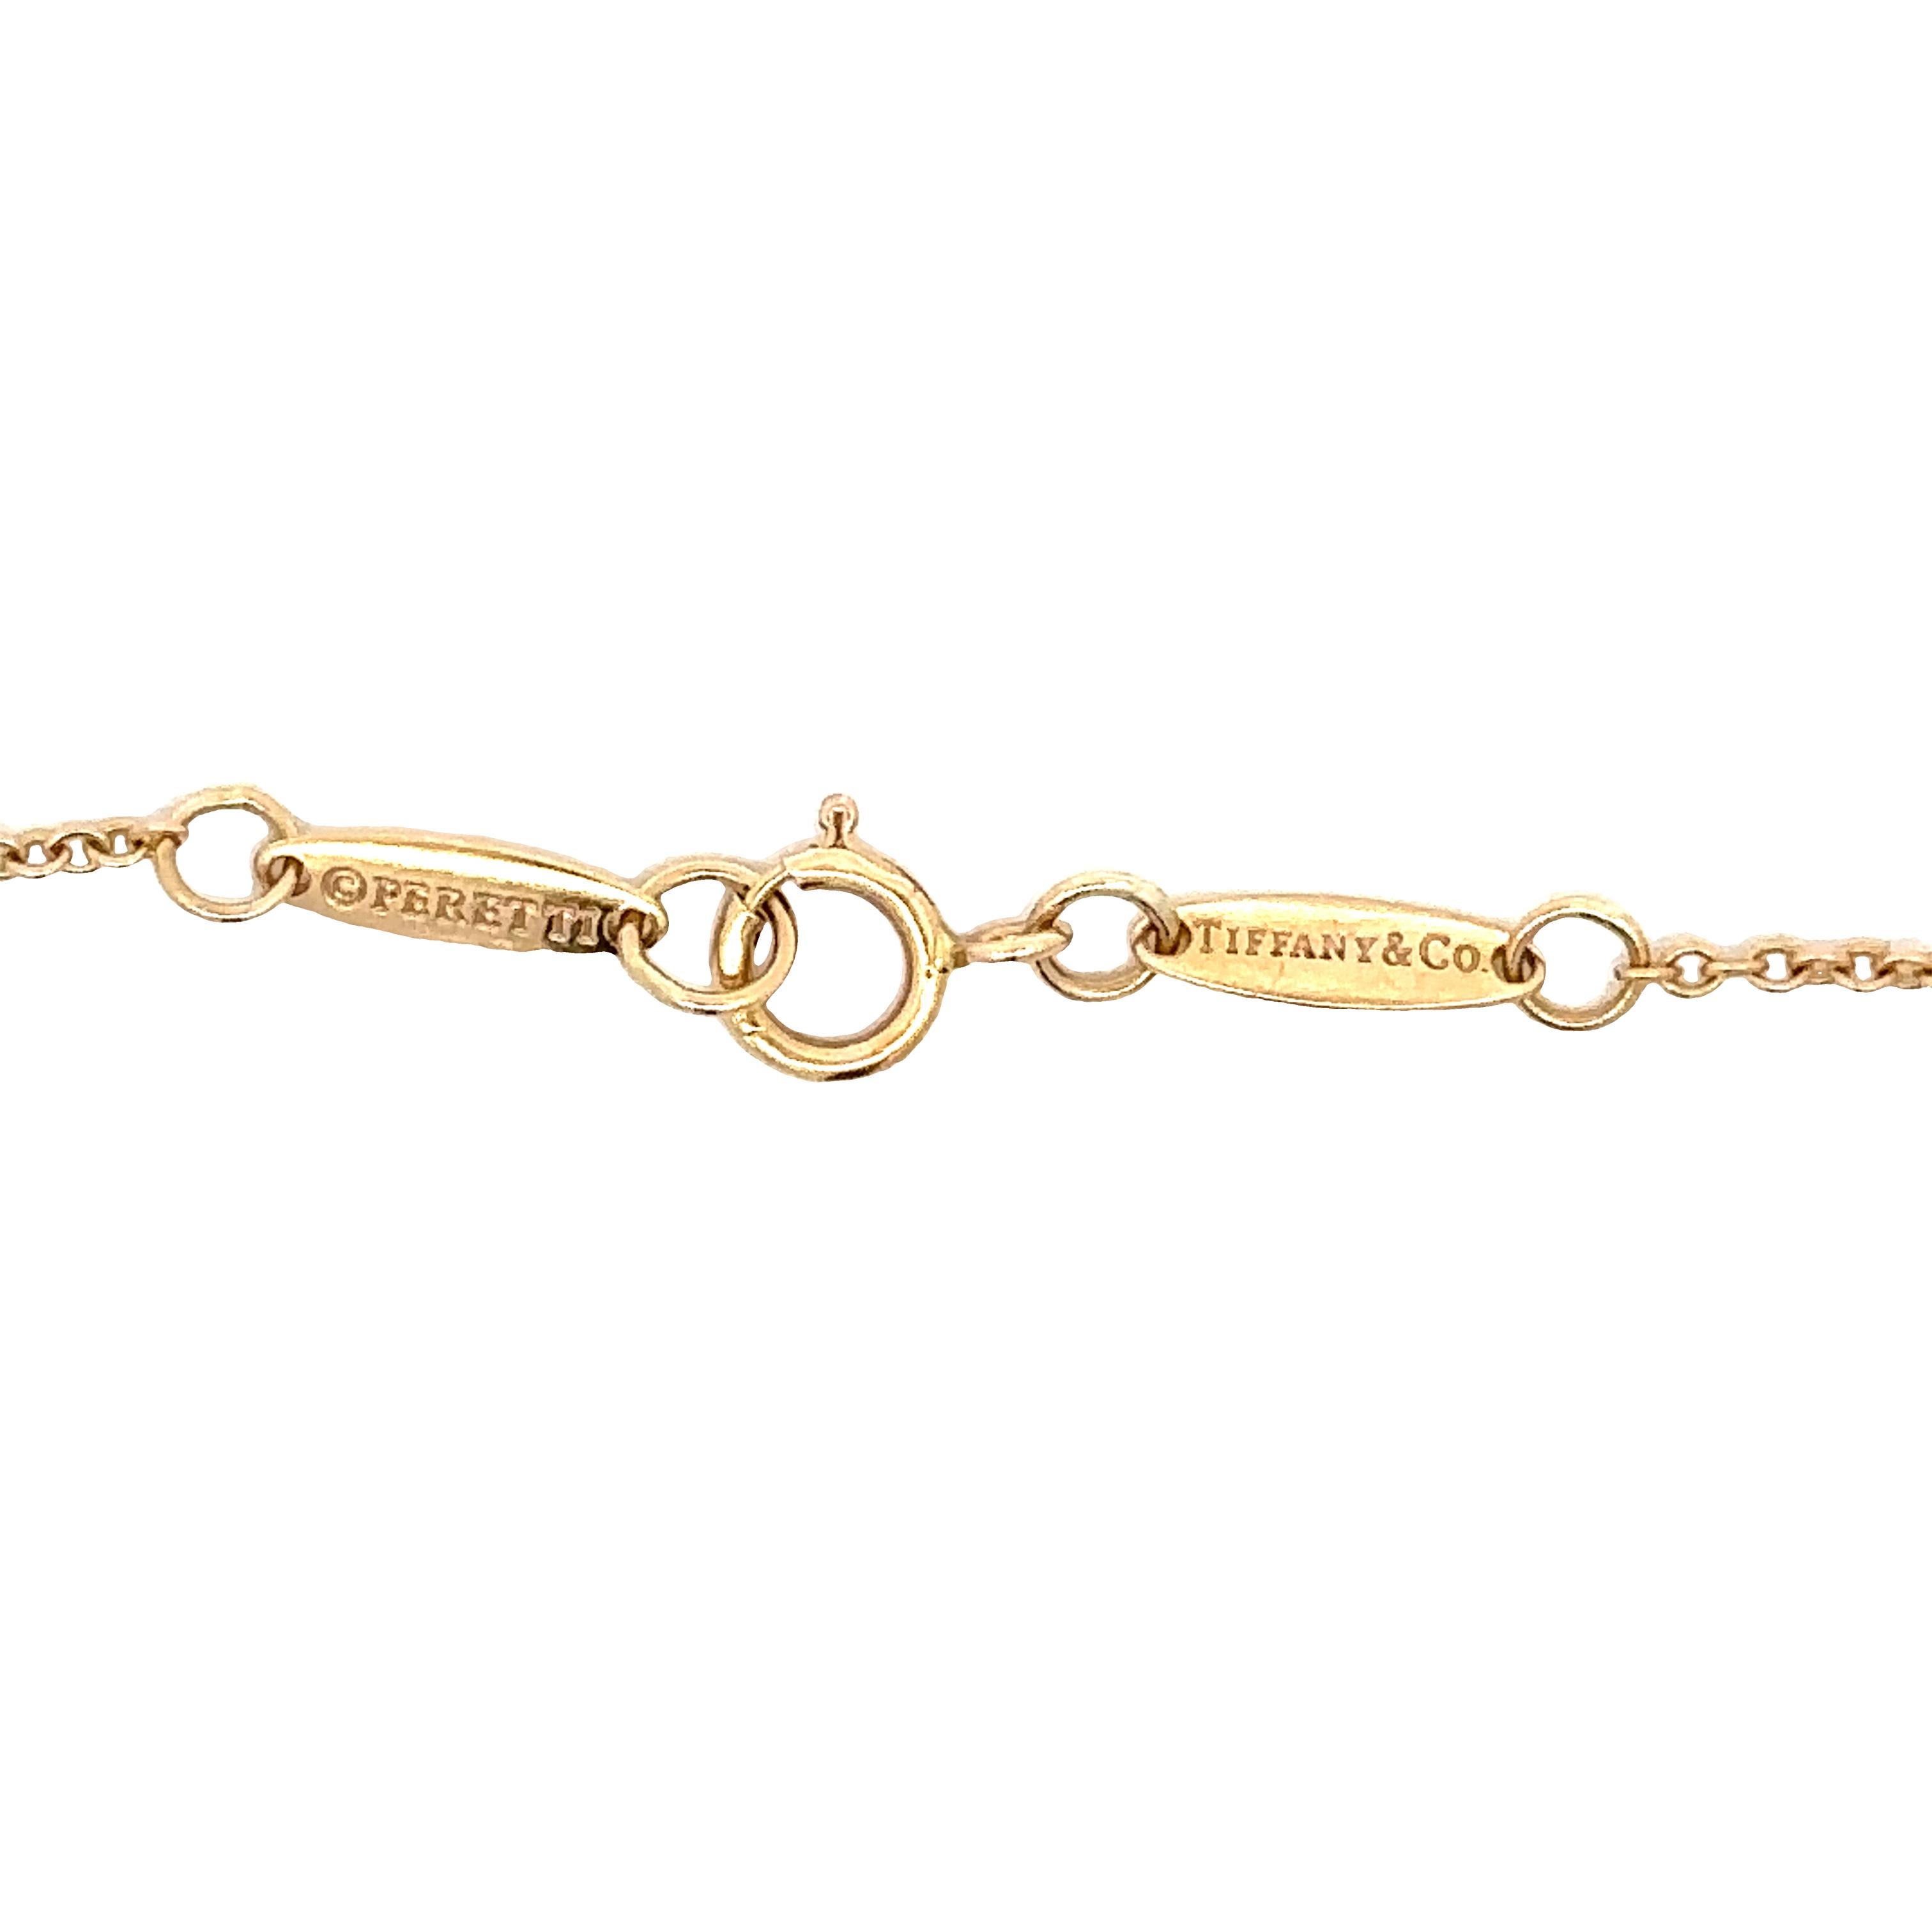 Brilliant Cut Diamonds by the Yard Diamond Bracelet in Rose Gold by Elsa Peretti T & Co For Sale